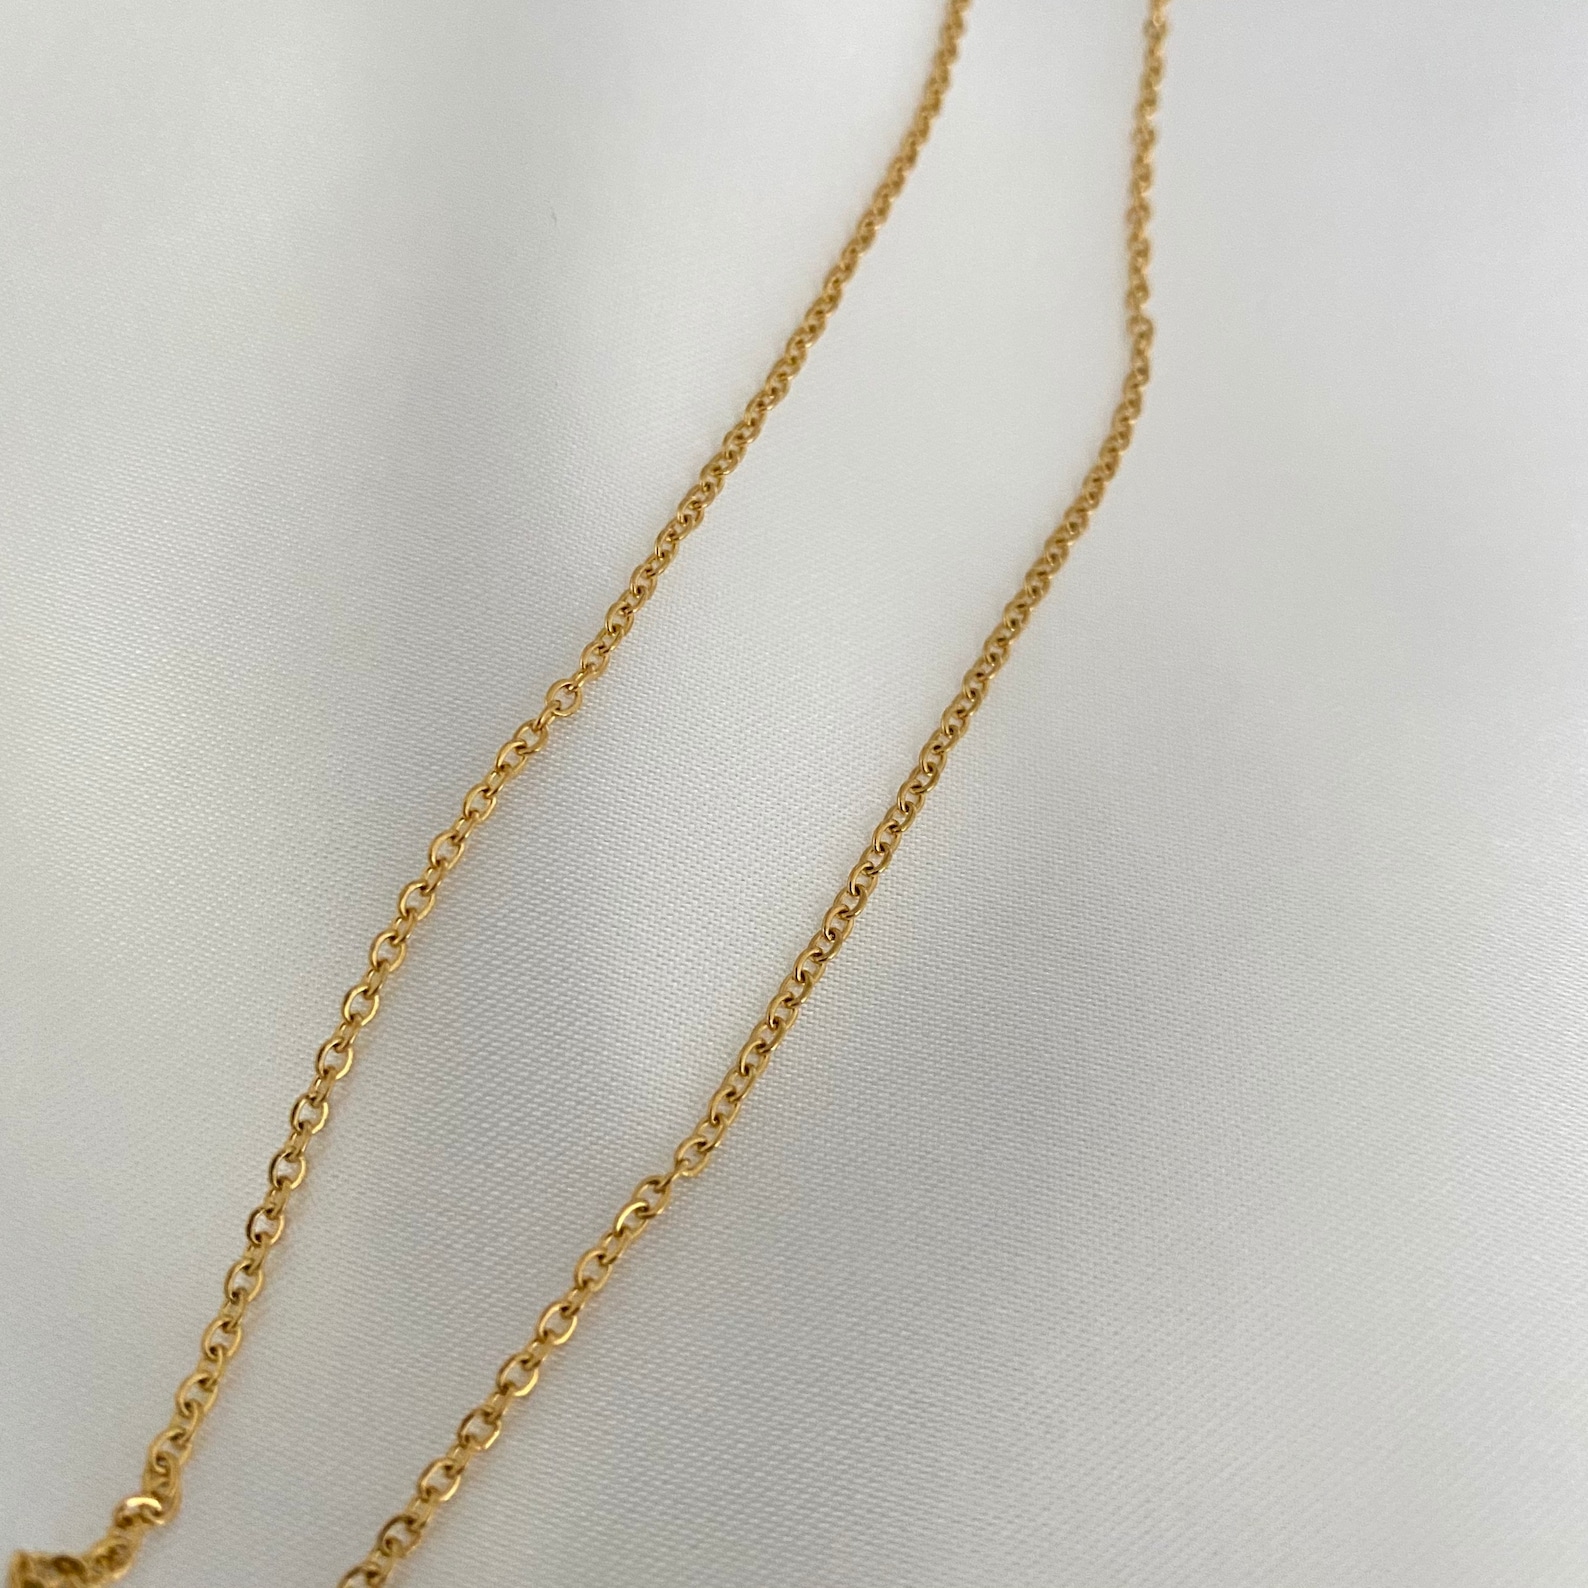 Gold chain necklace non tarnish gold plated chain necklace | Etsy